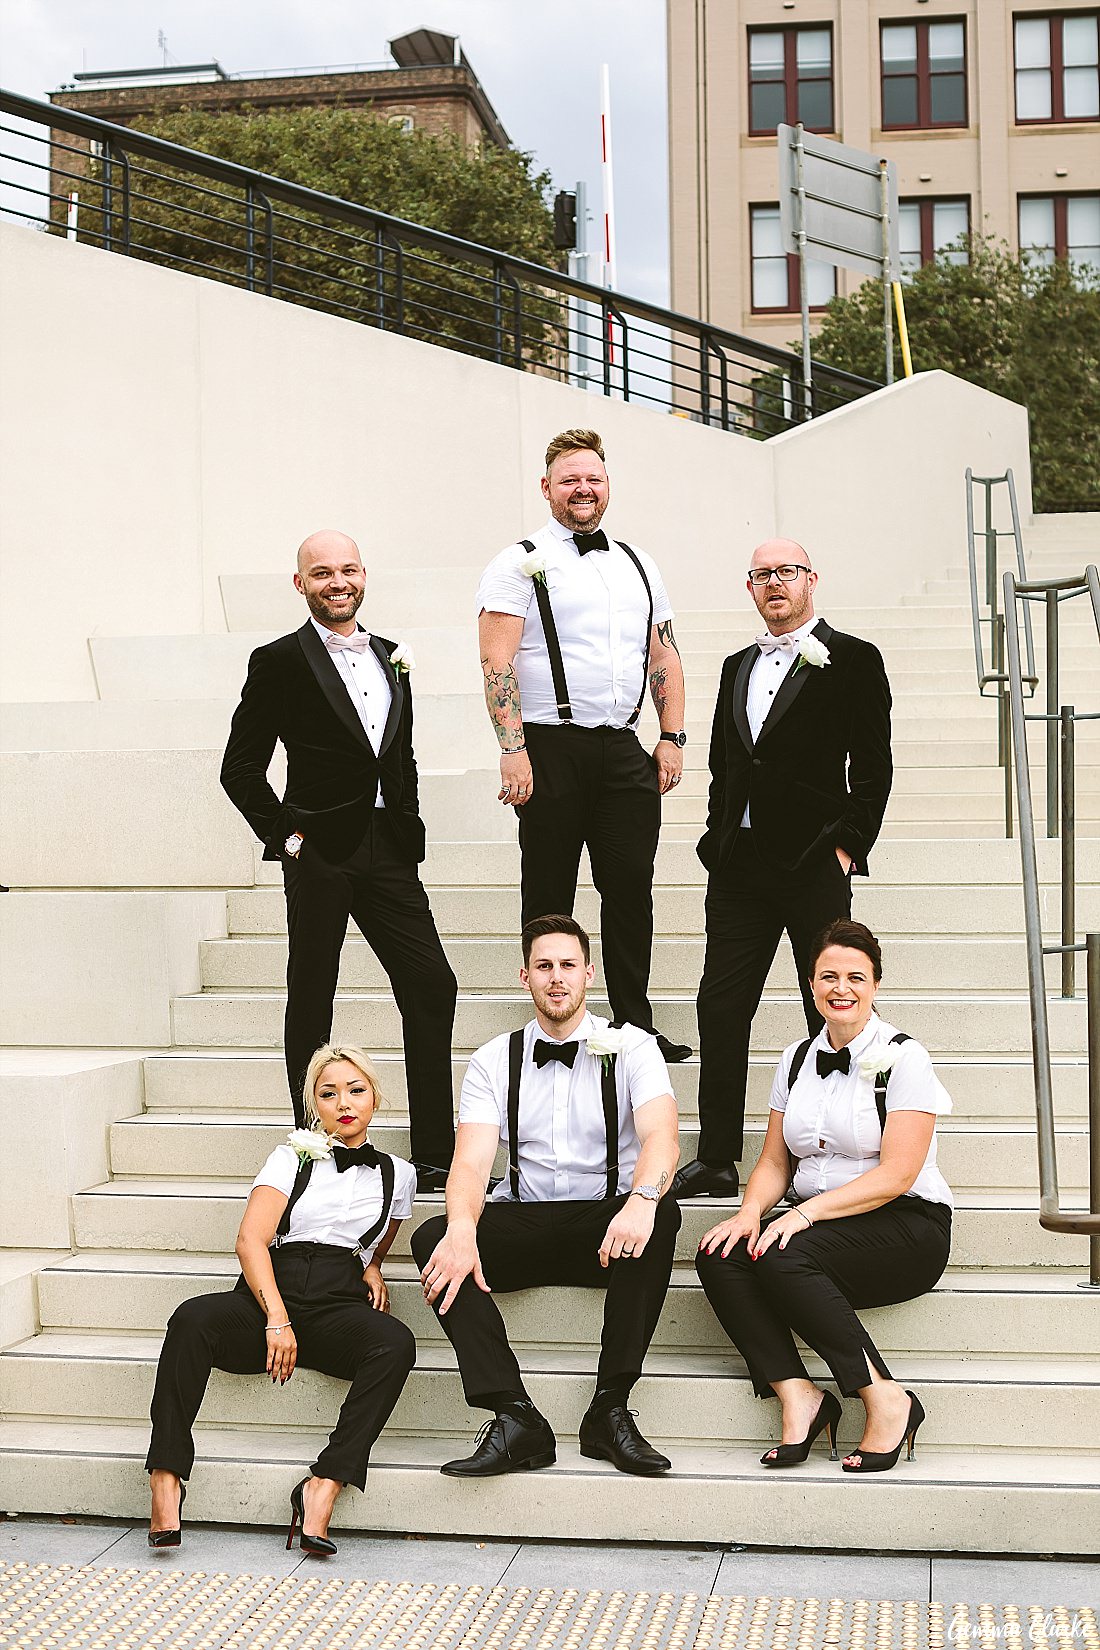 Wedding party wearing short sleeves, bow ties and suspenders while the two grooms rock a velvet jacket tuxedo at this Sydney Gay Wedding